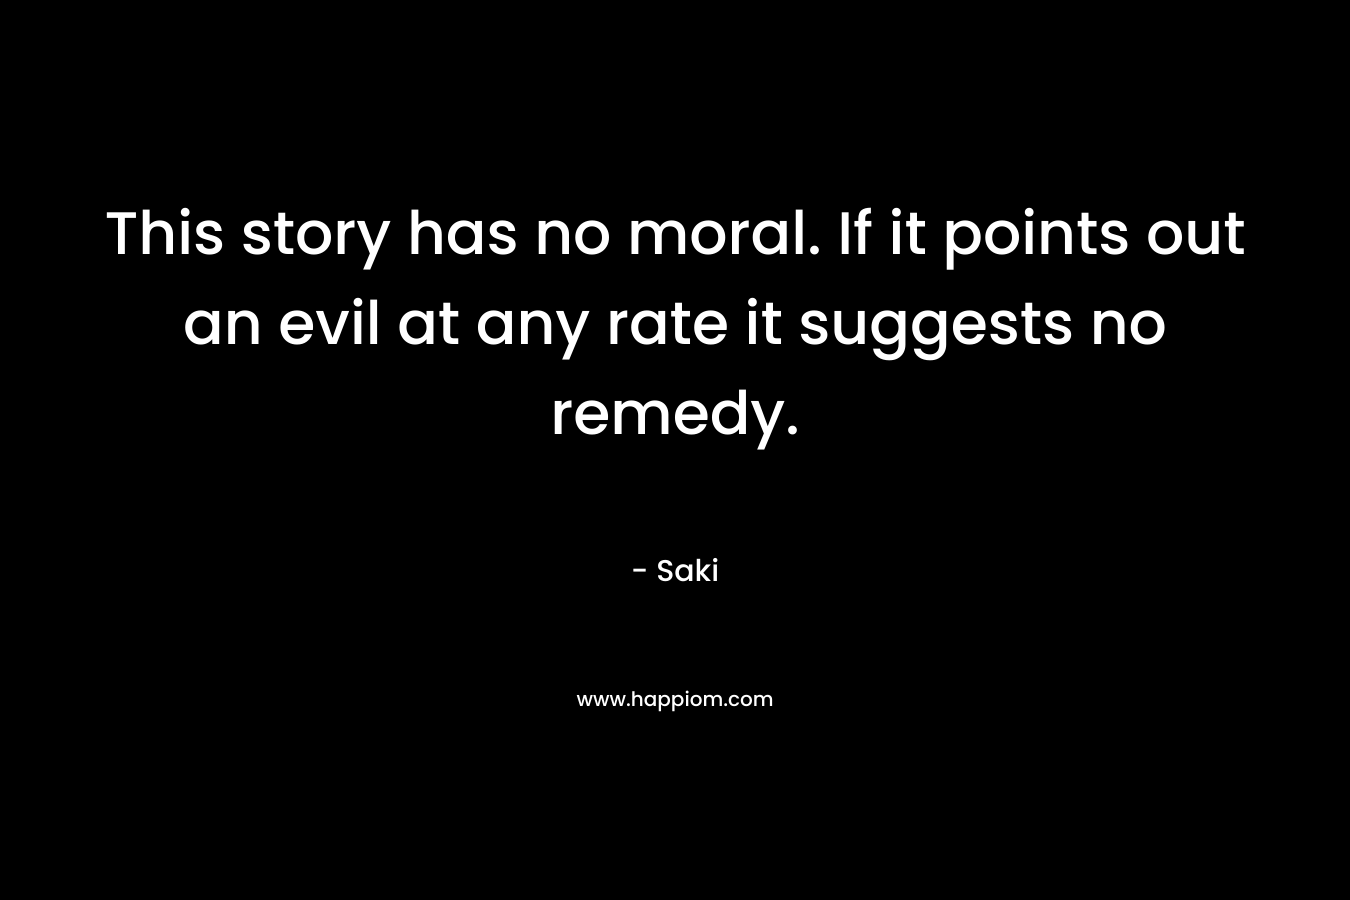 This story has no moral. If it points out an evil at any rate it suggests no remedy. – Saki